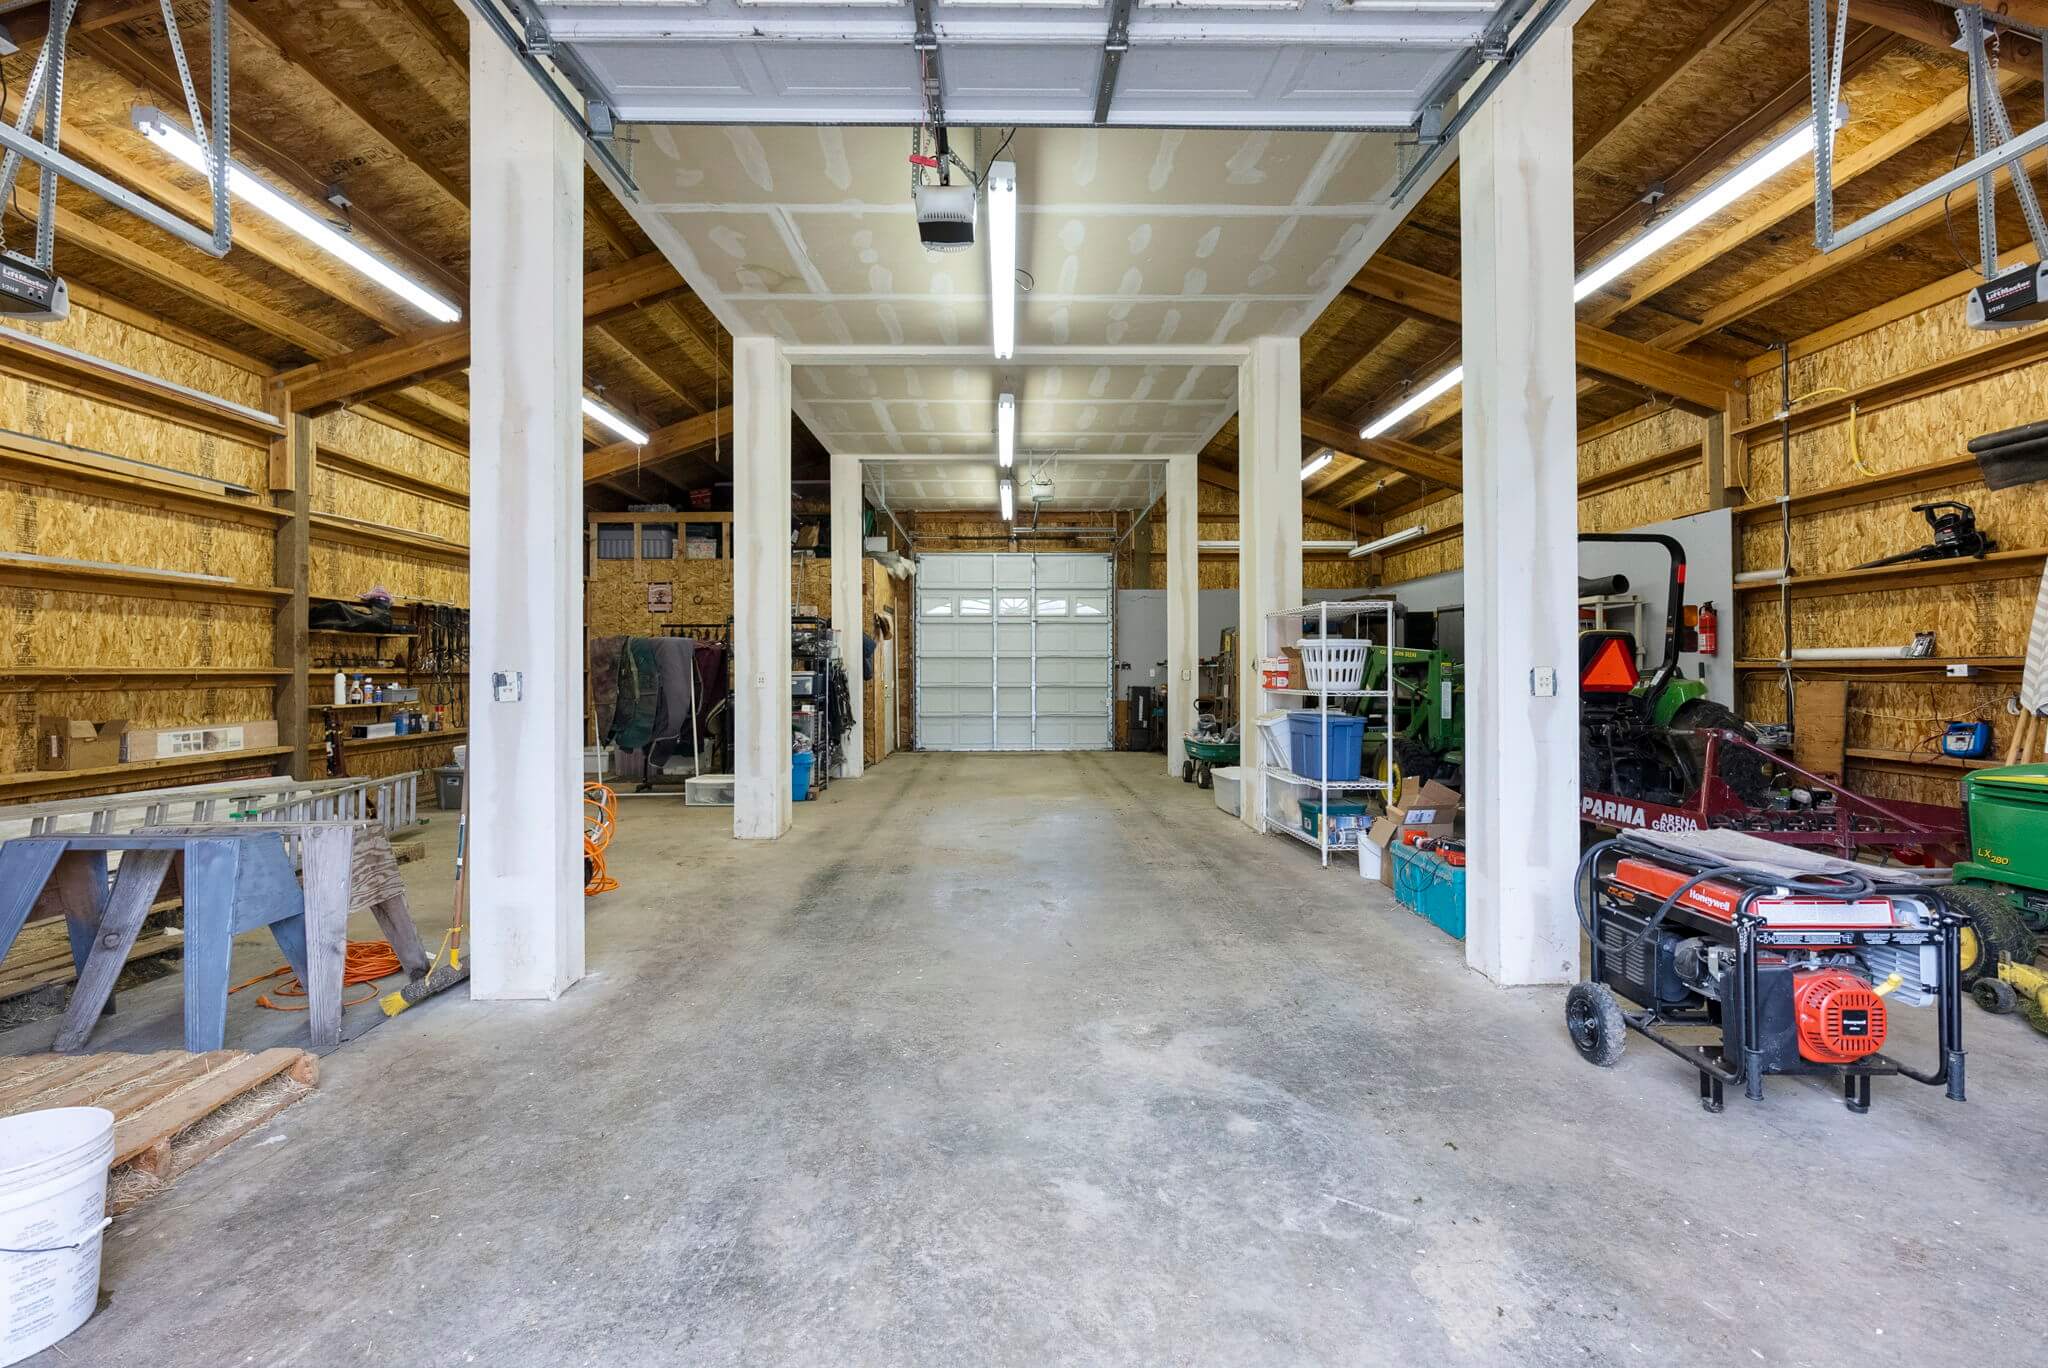 Newer barn with concrete floors is currently used as a shop but could make an excellent show horse barn with the addition of stalls